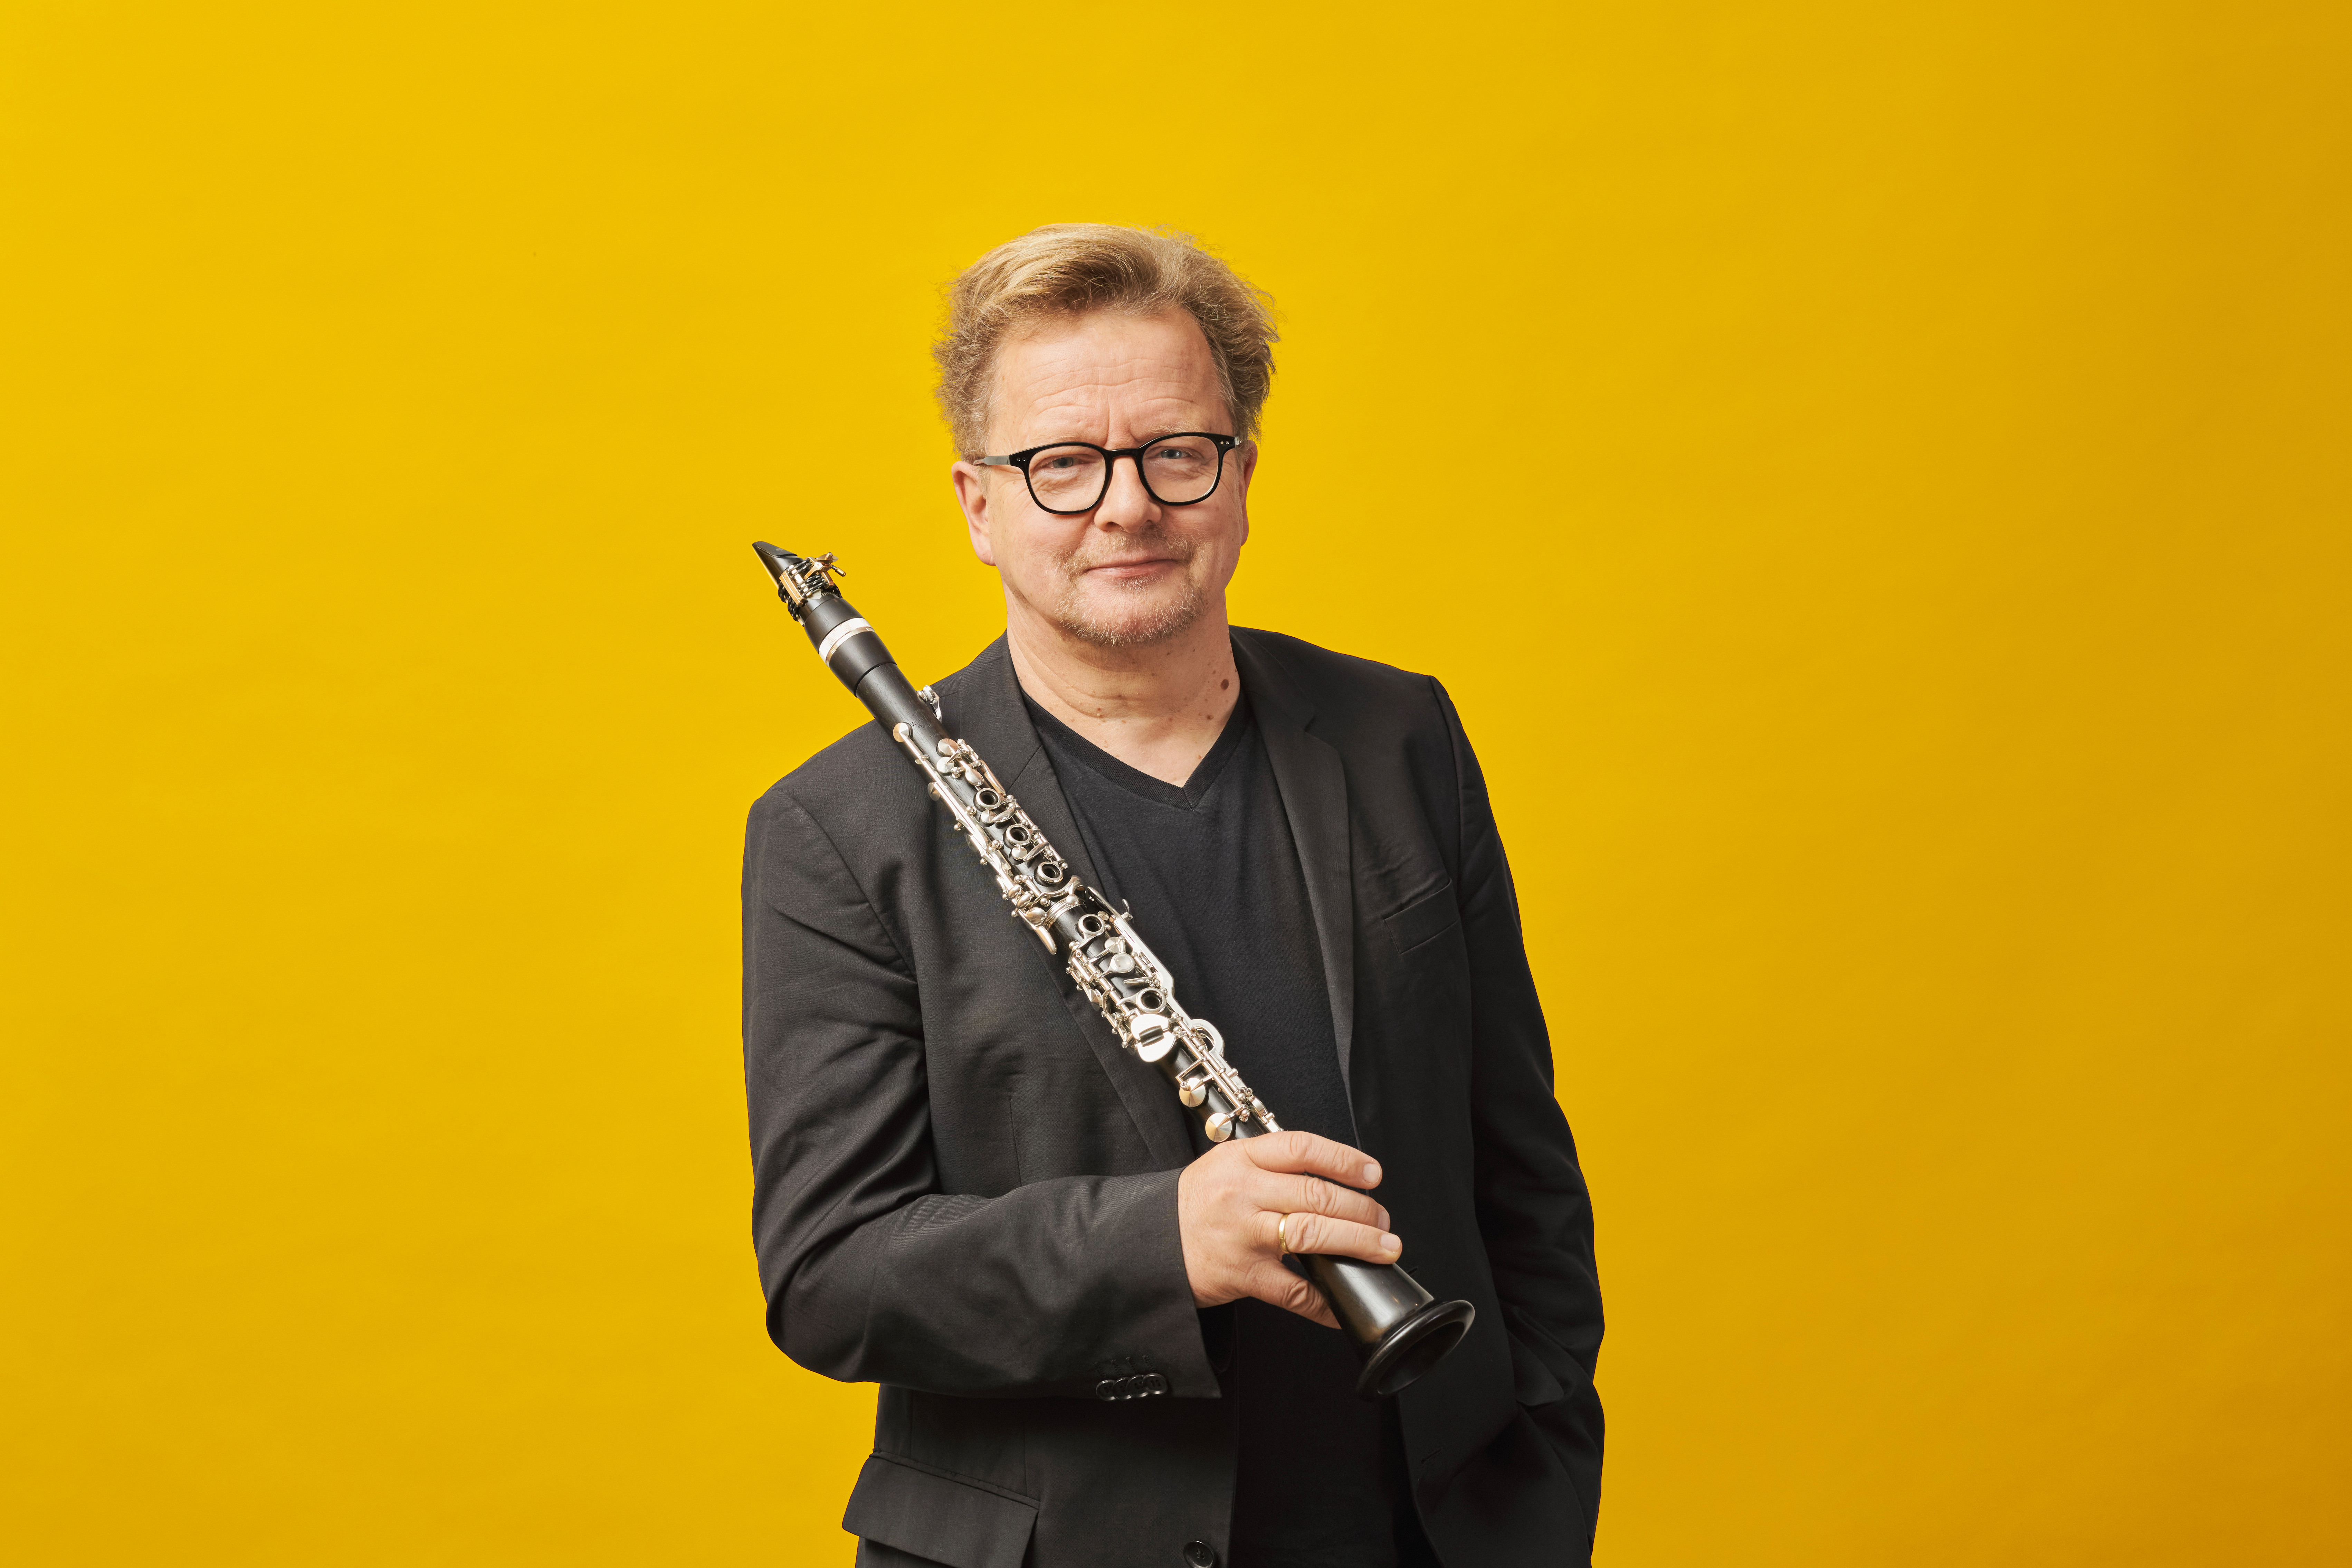 A portrait photo of Wenzel Fuchs, standind in front of a yellow background with his clarinet in his hands.